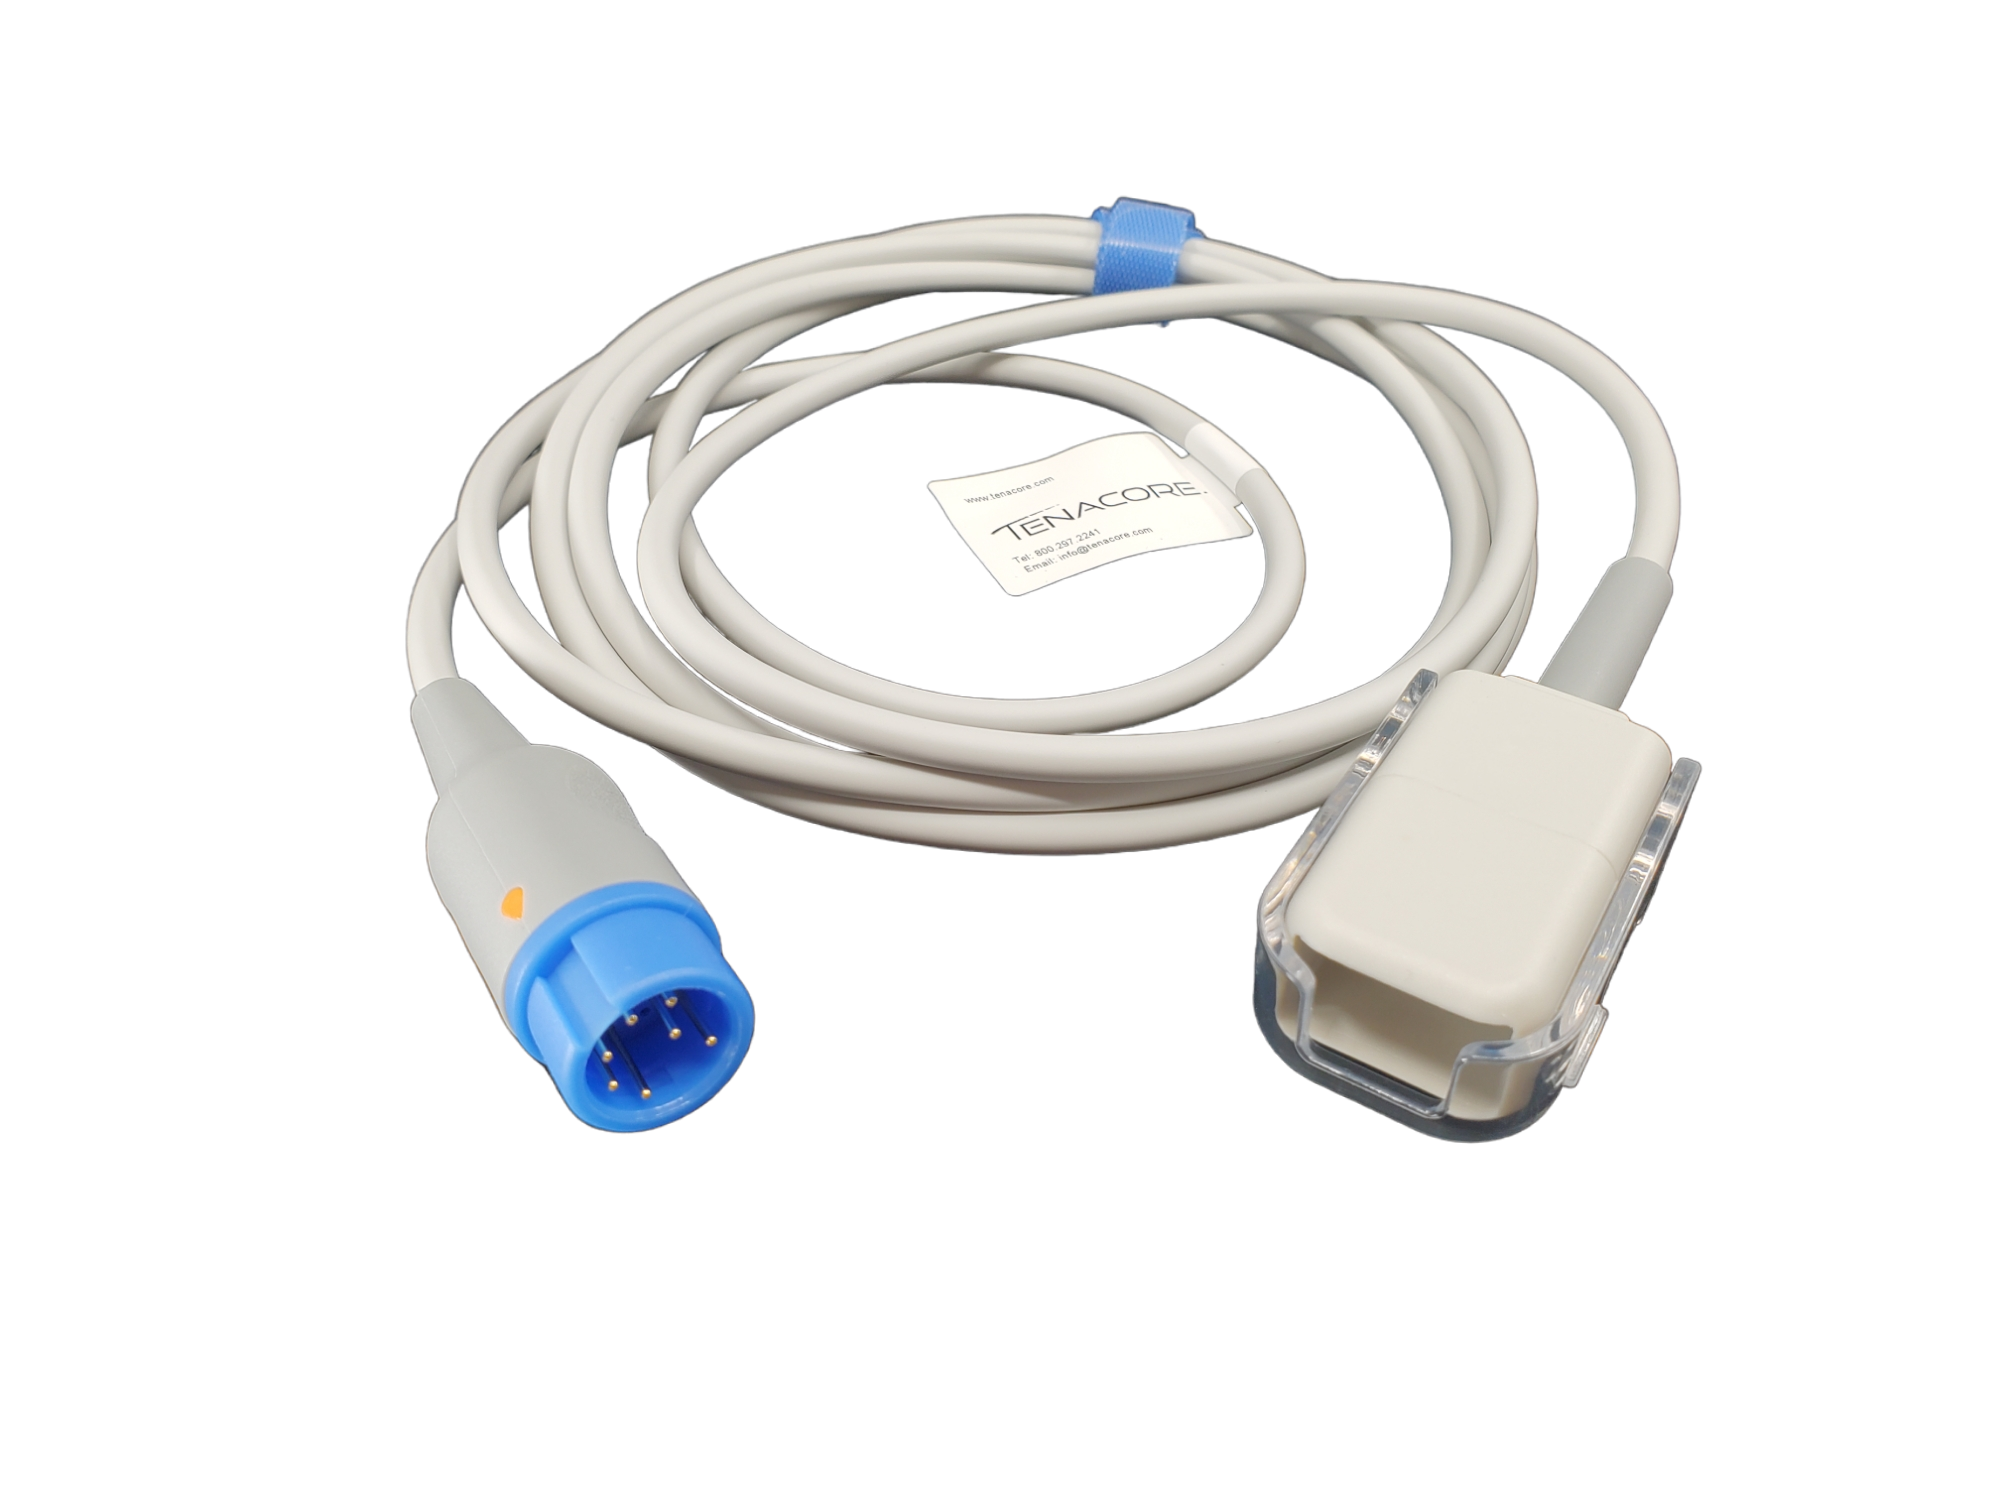 Mindray Compatible SpO2 Adaptor Cable Replacement: 2.4m, use with Nellcor-Oxismart sensor